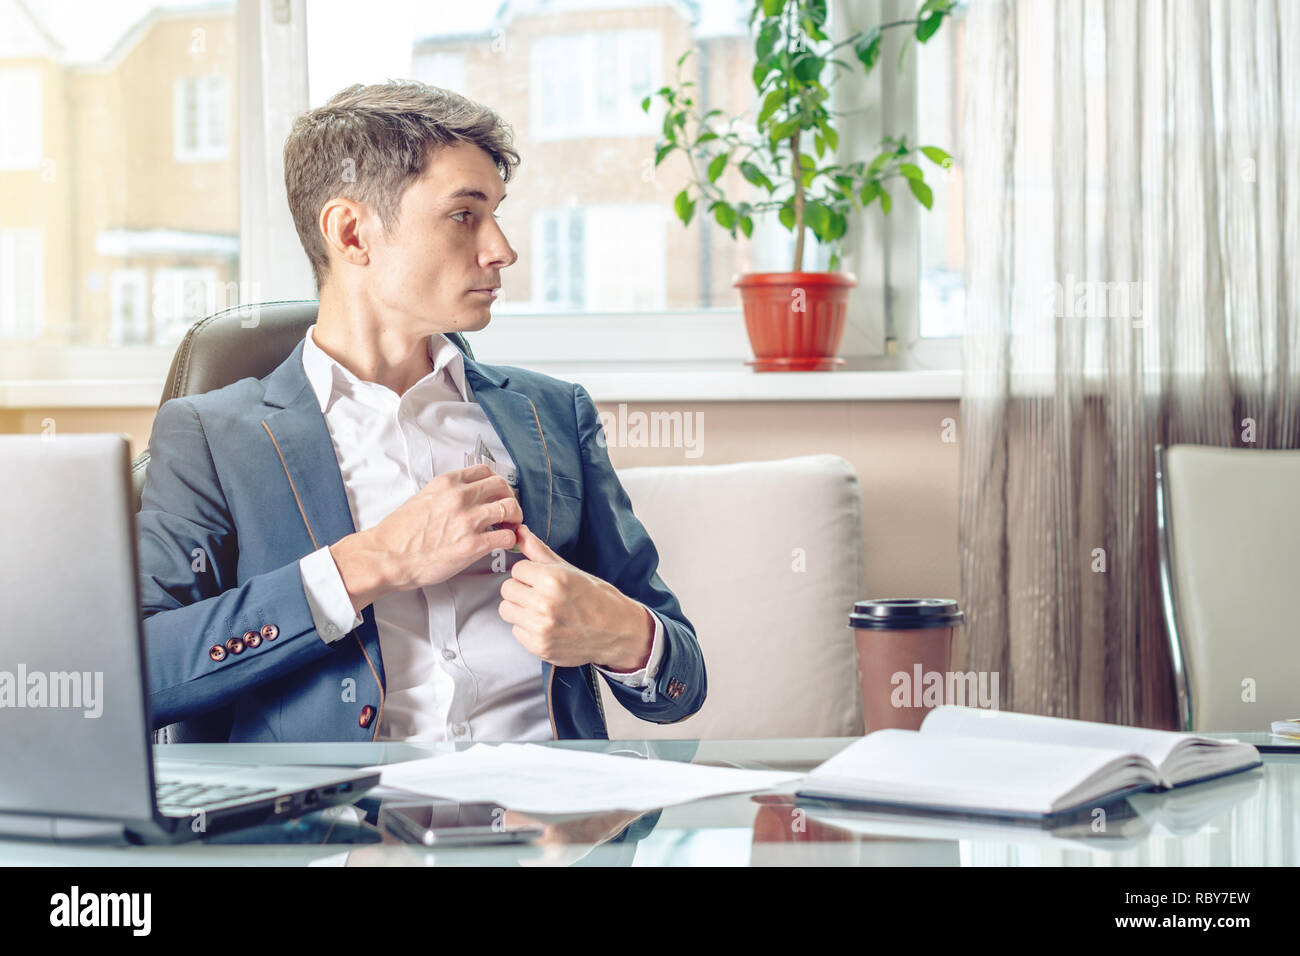 Businessman official sitting in the workplace in the office hides a bribe unnoticed in his pocket. The concept of corruption and bribery Stock Photo